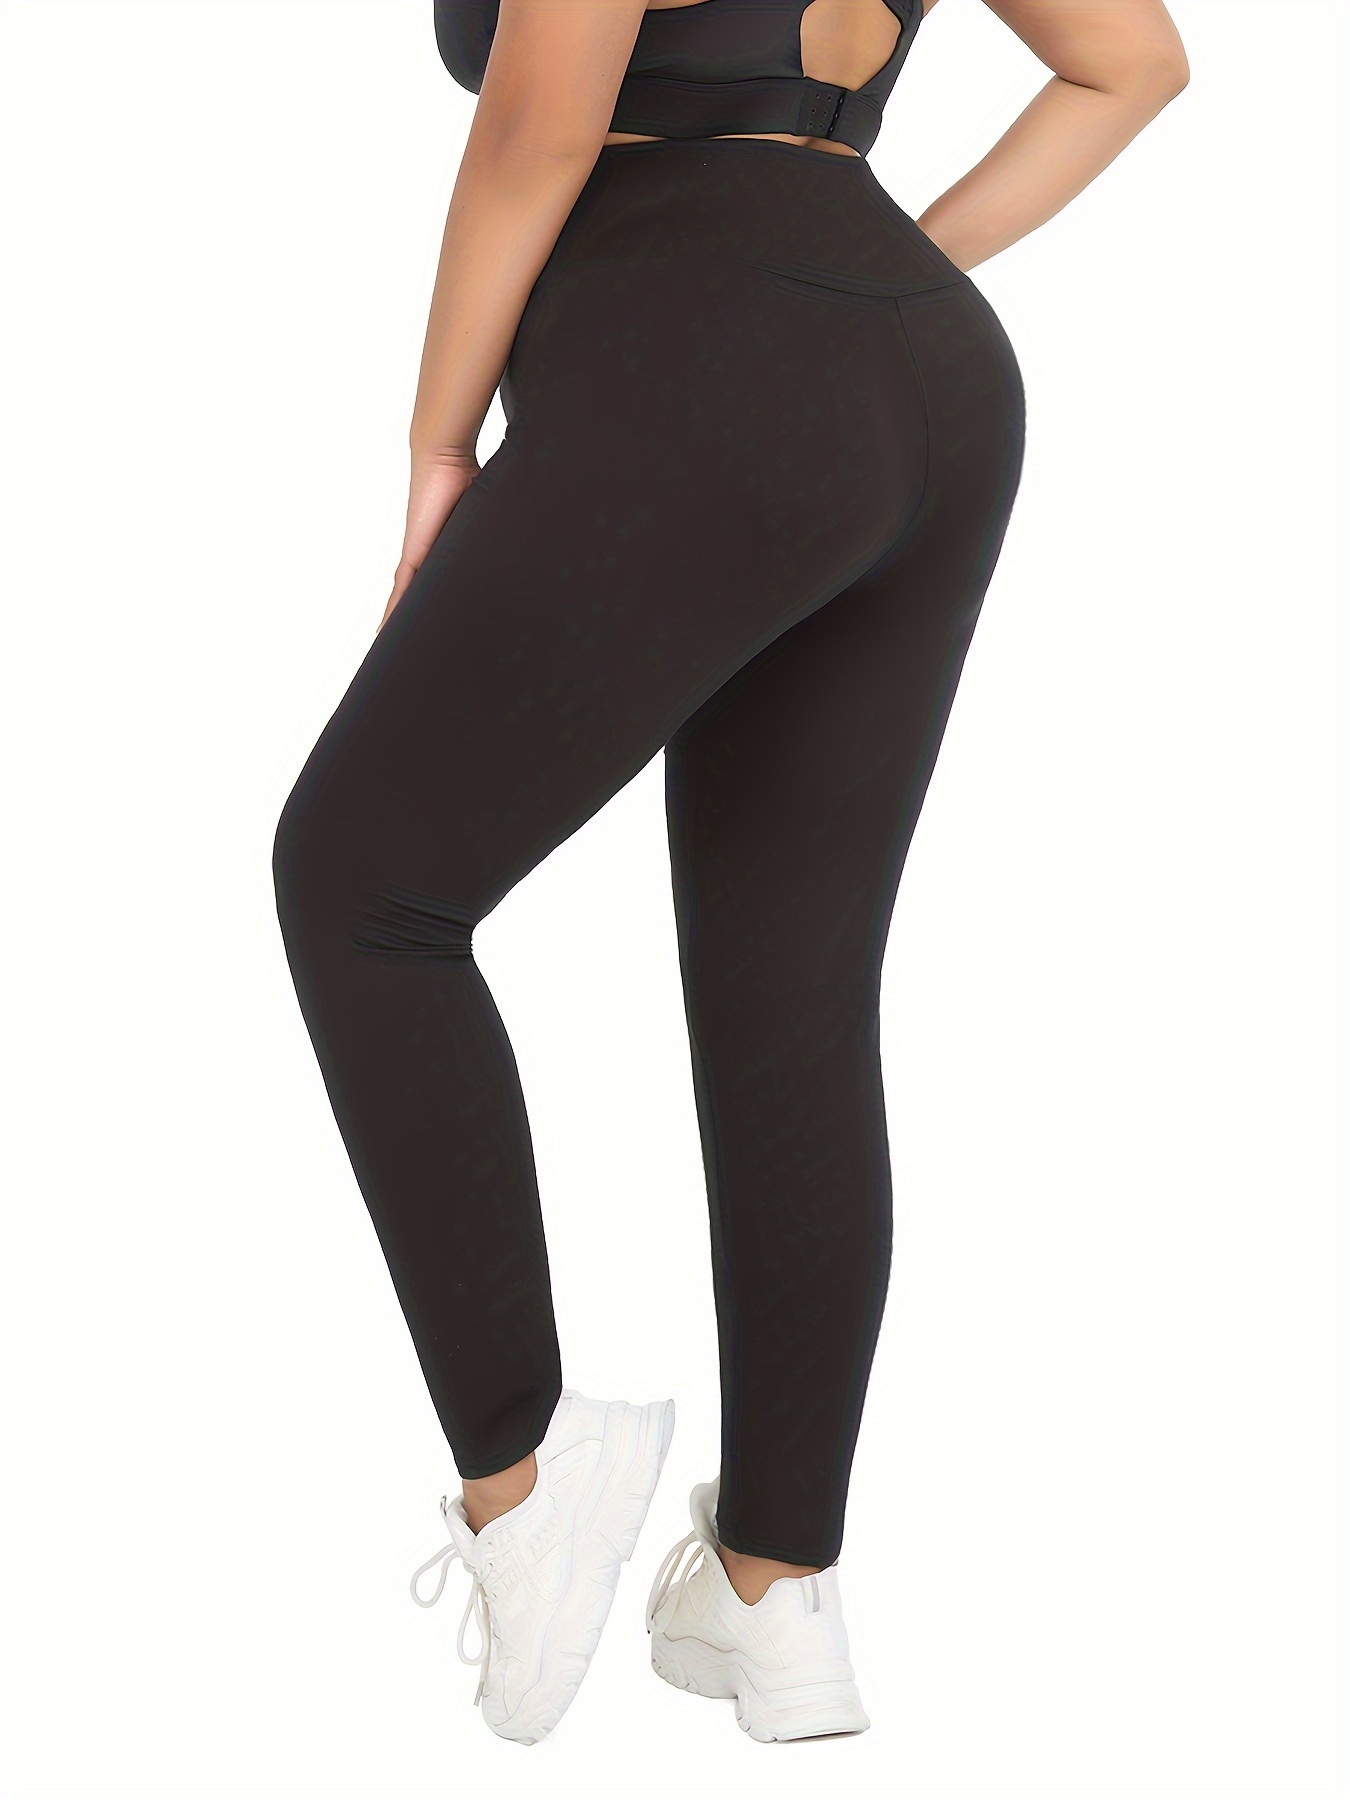 Plus Size Sports Leggings, Women's Plus Solid High Waisted Tummy